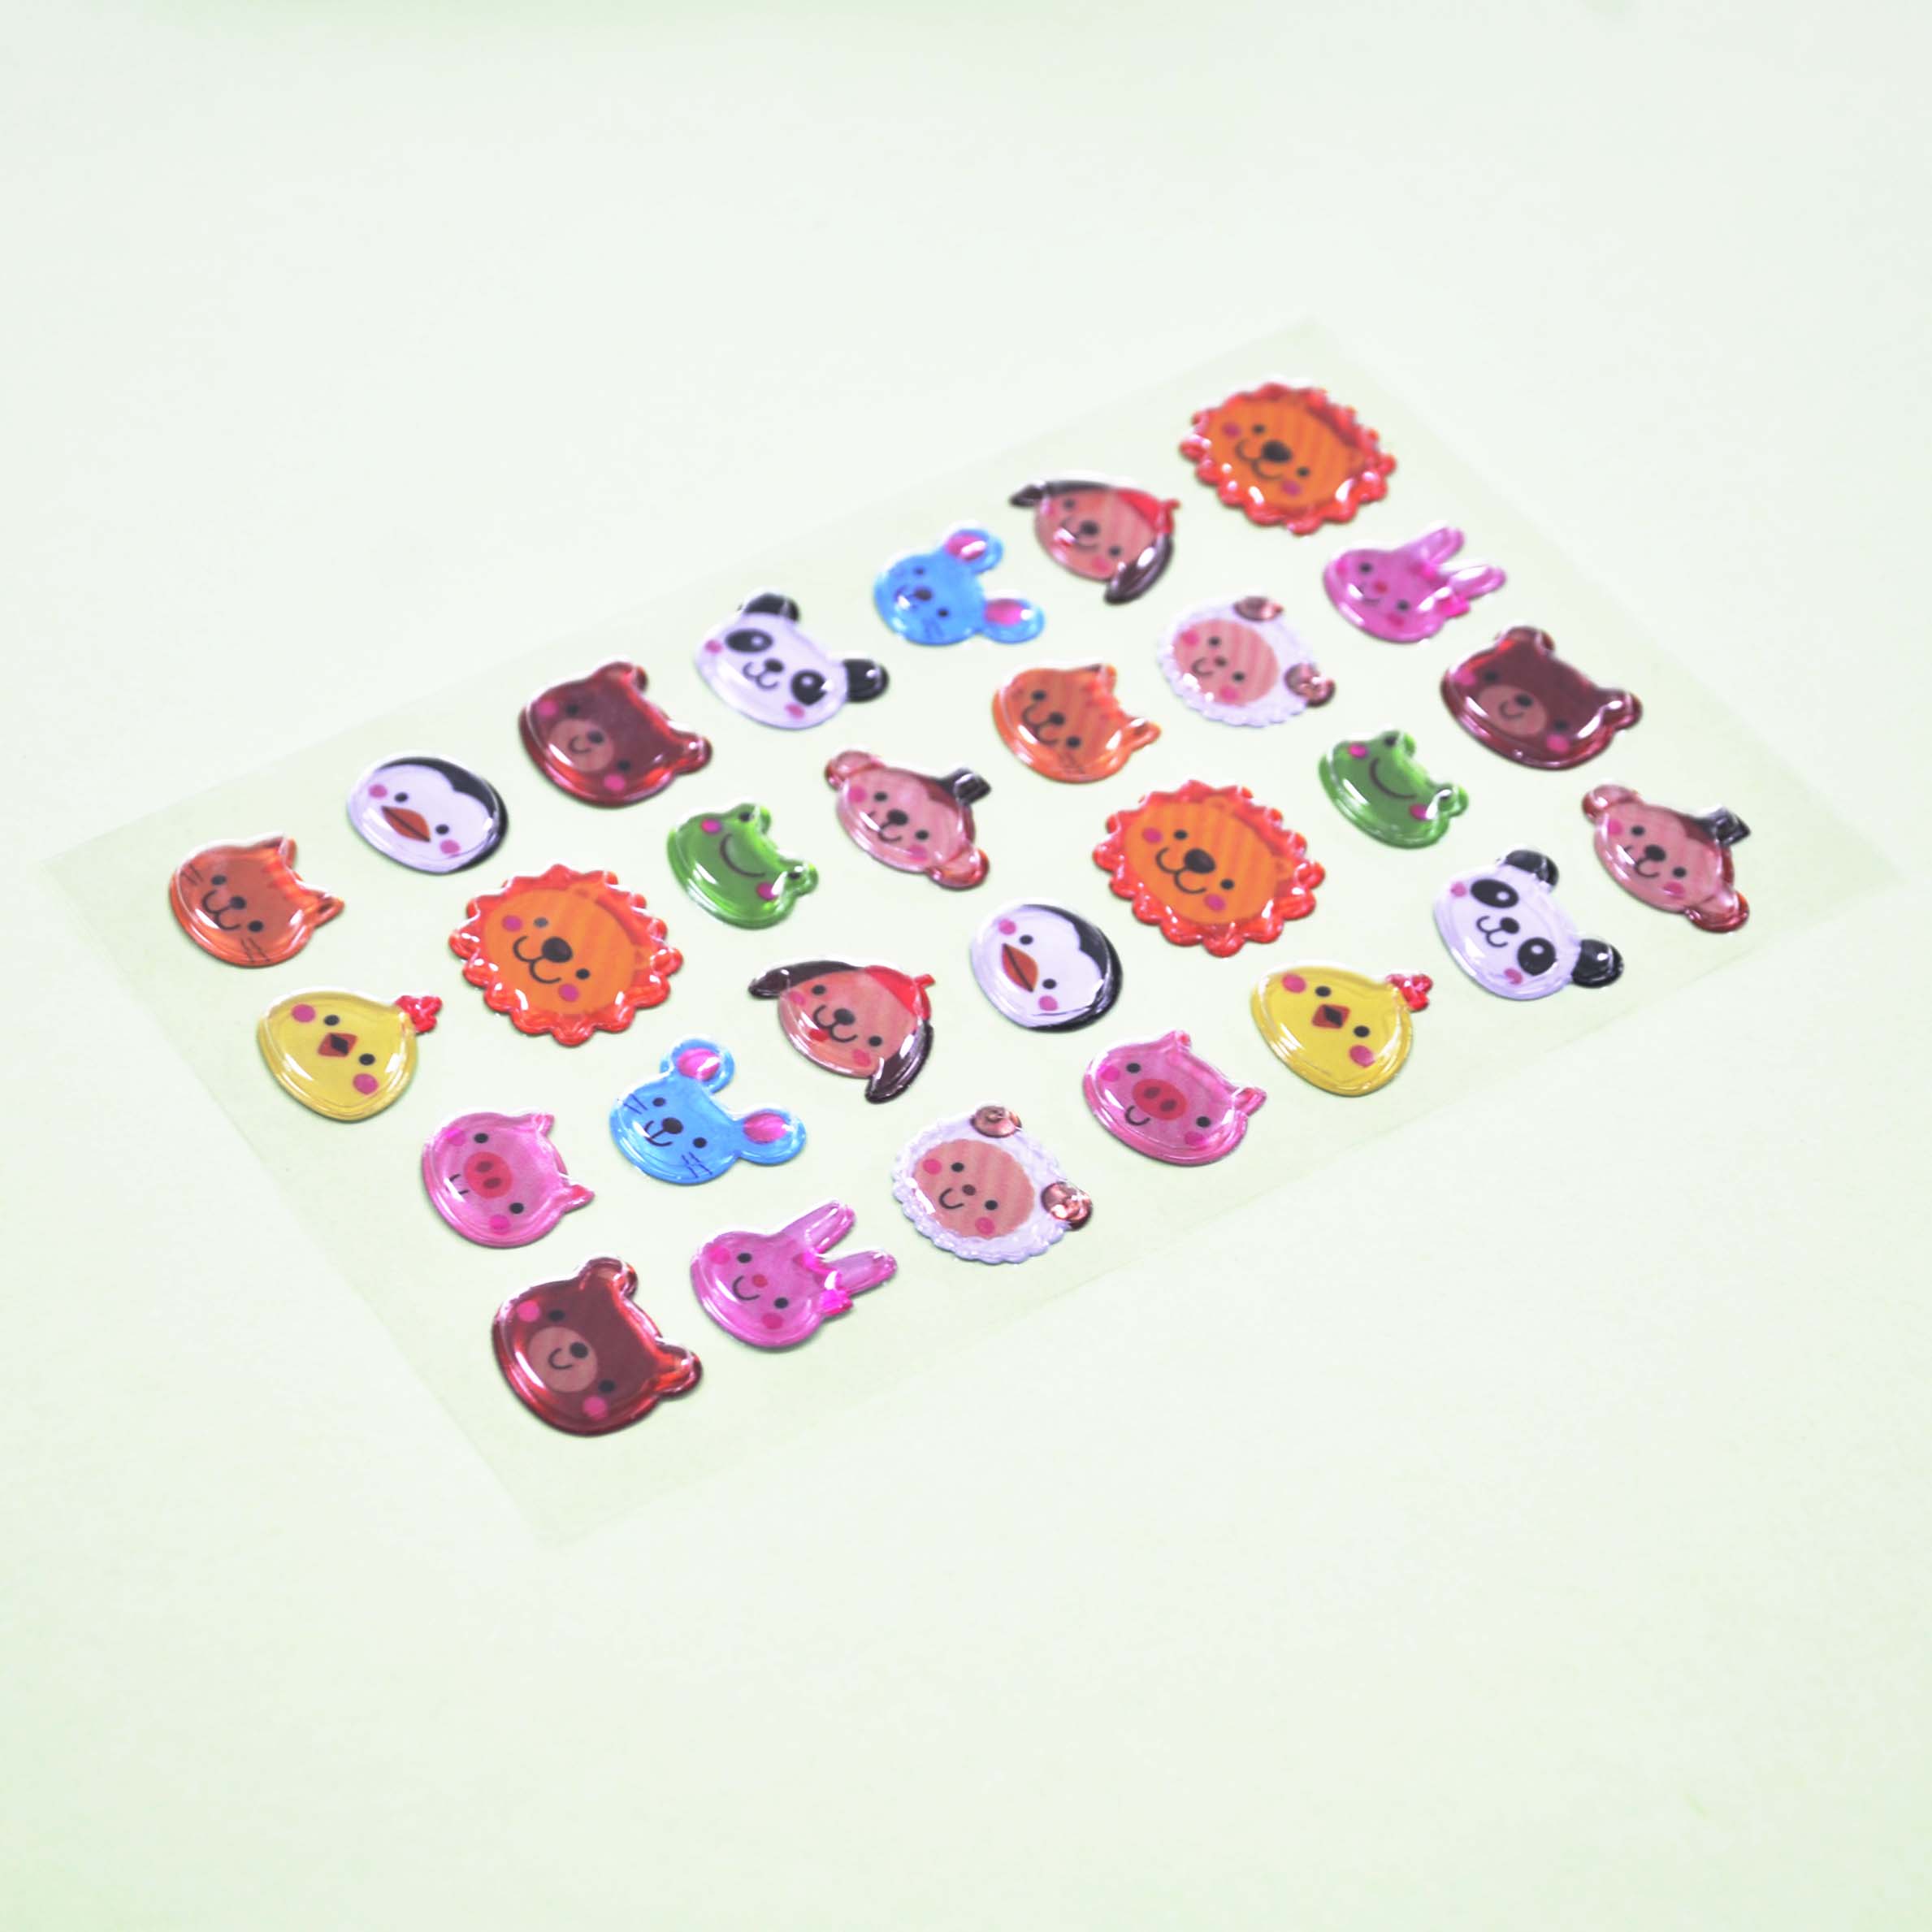 Custom 3D Blister Plastic Sticker With Smile Animals Faces